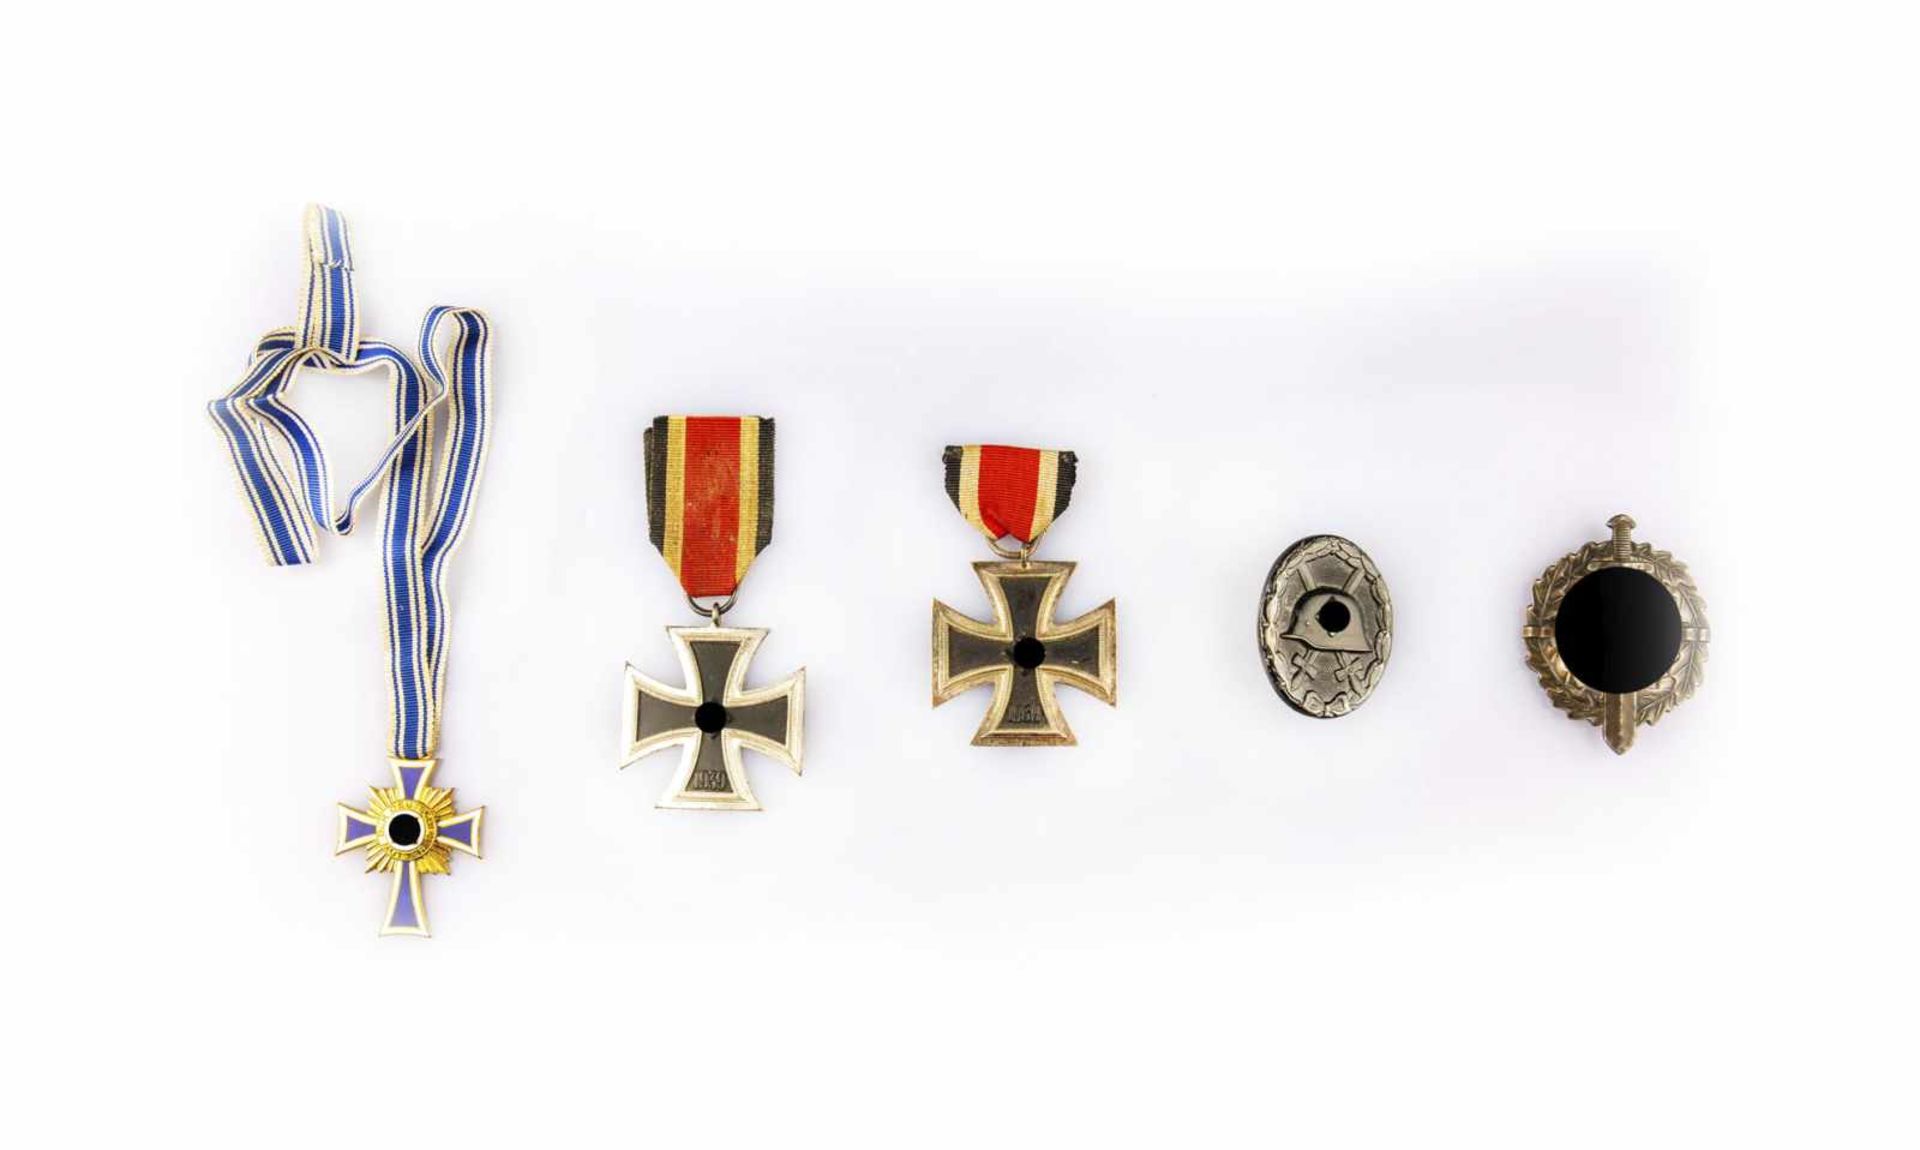 Set of medals and decorations of the Third Reich